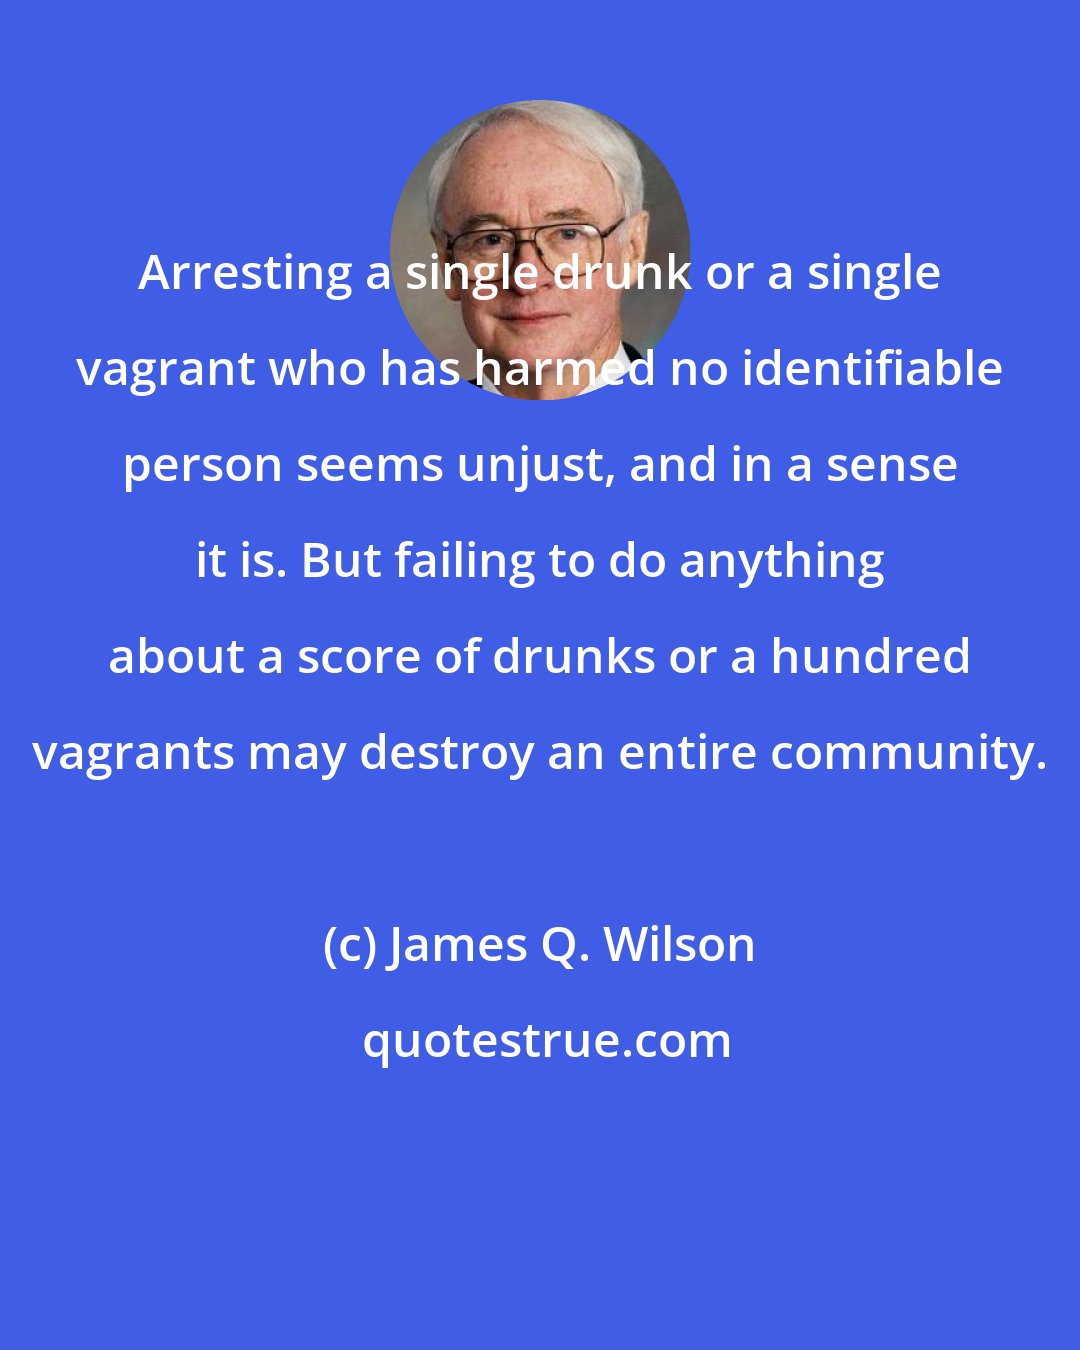 James Q. Wilson: Arresting a single drunk or a single vagrant who has harmed no identifiable person seems unjust, and in a sense it is. But failing to do anything about a score of drunks or a hundred vagrants may destroy an entire community.